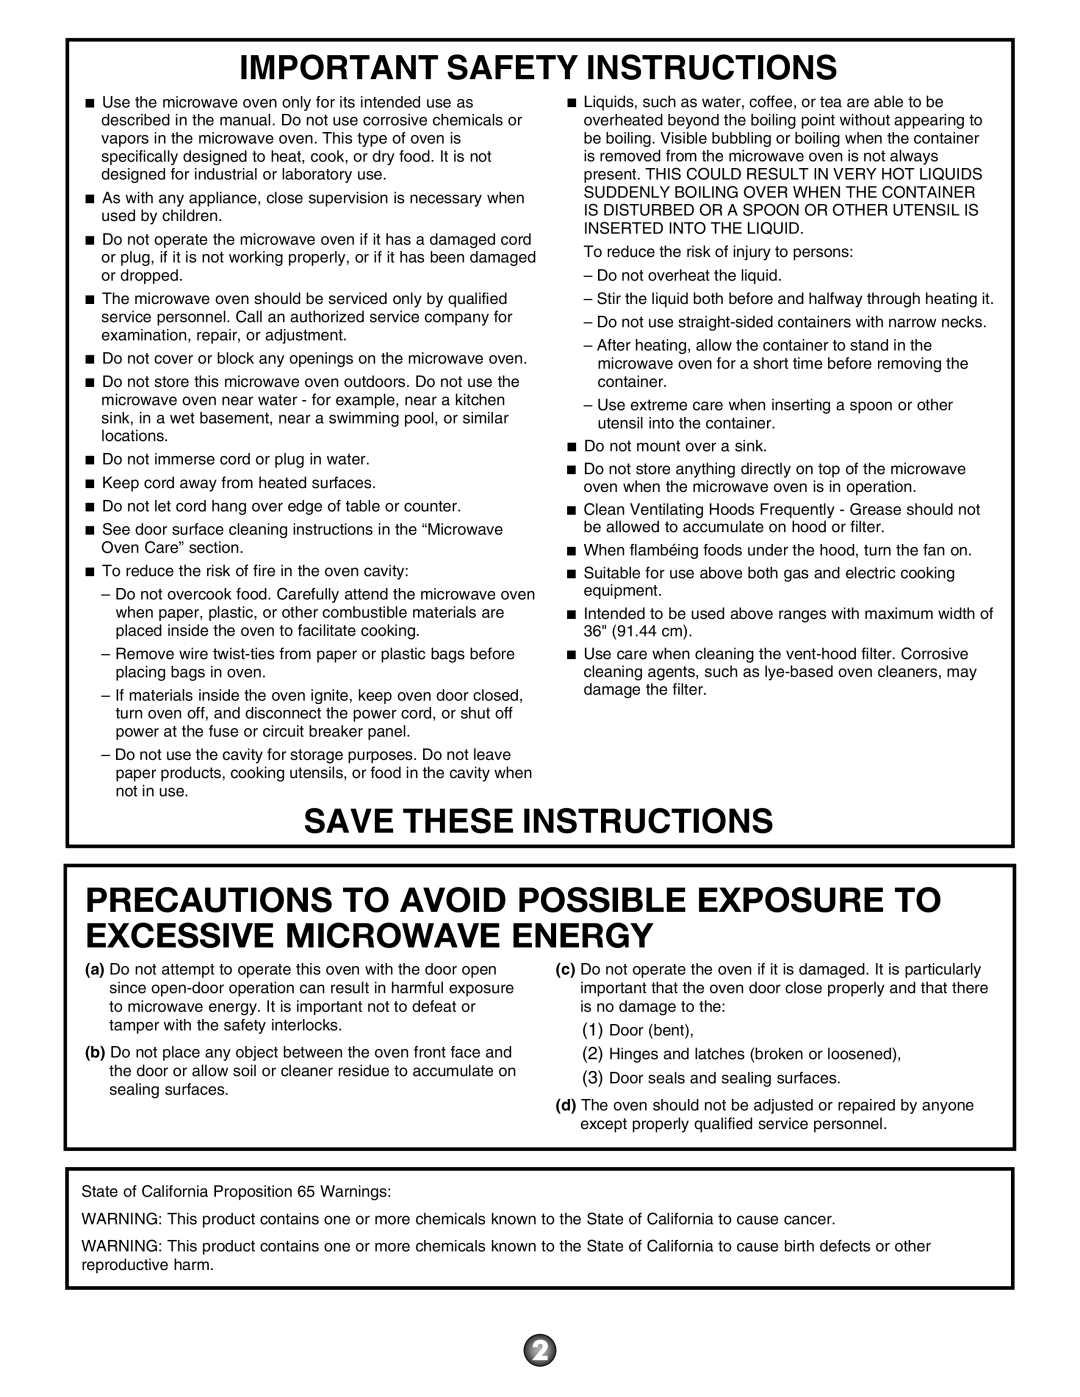 Whirlpool W10669285A Precautions To Avoid Possible Exposure To Excessive Microwave Energy, Important Safety Instructions 